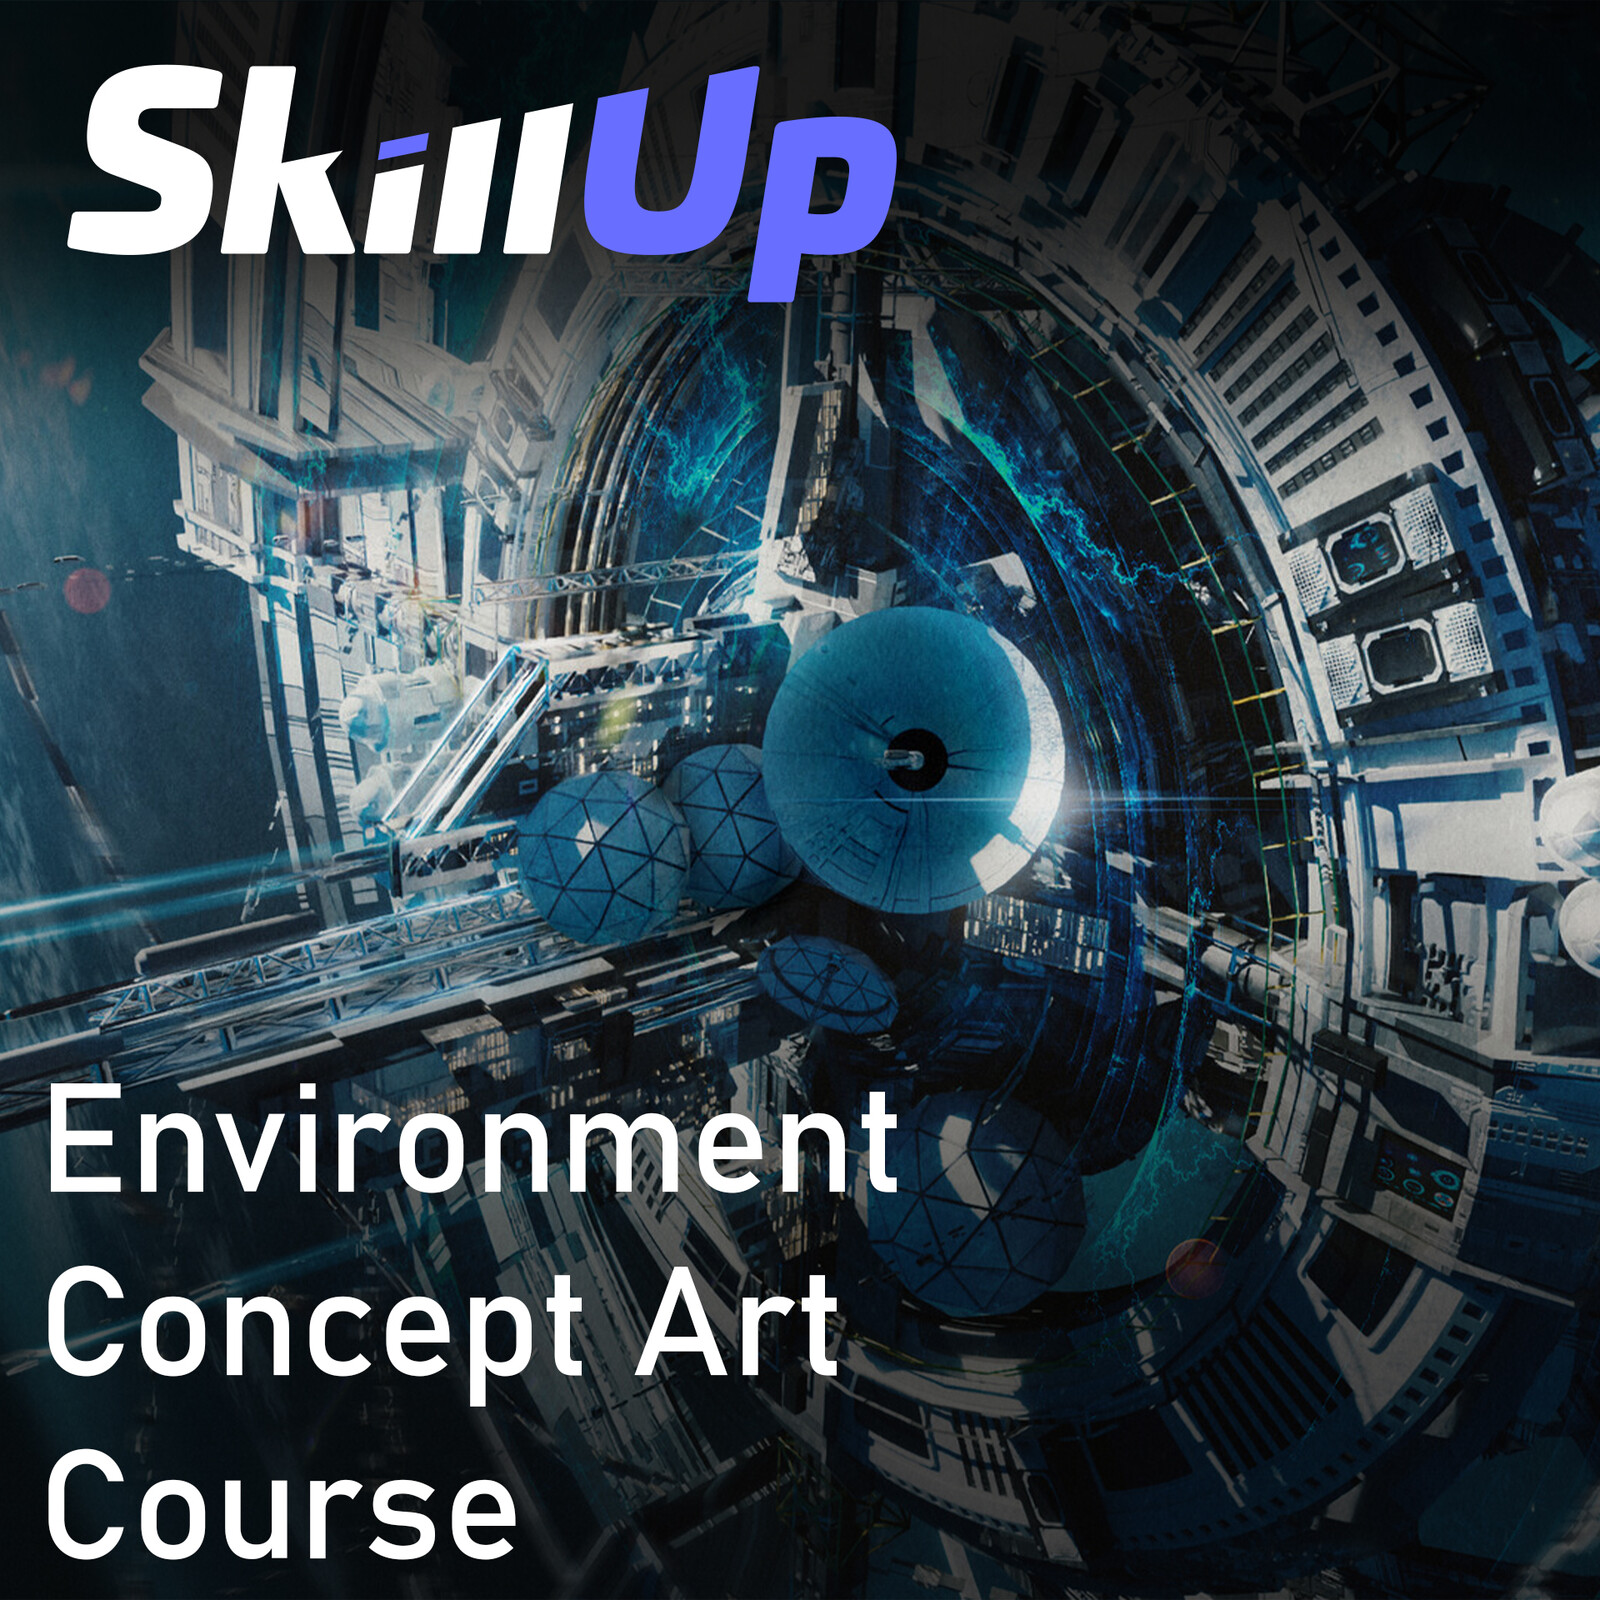 Concept Art Course for Skillup - (art platform for face-to-face courses)